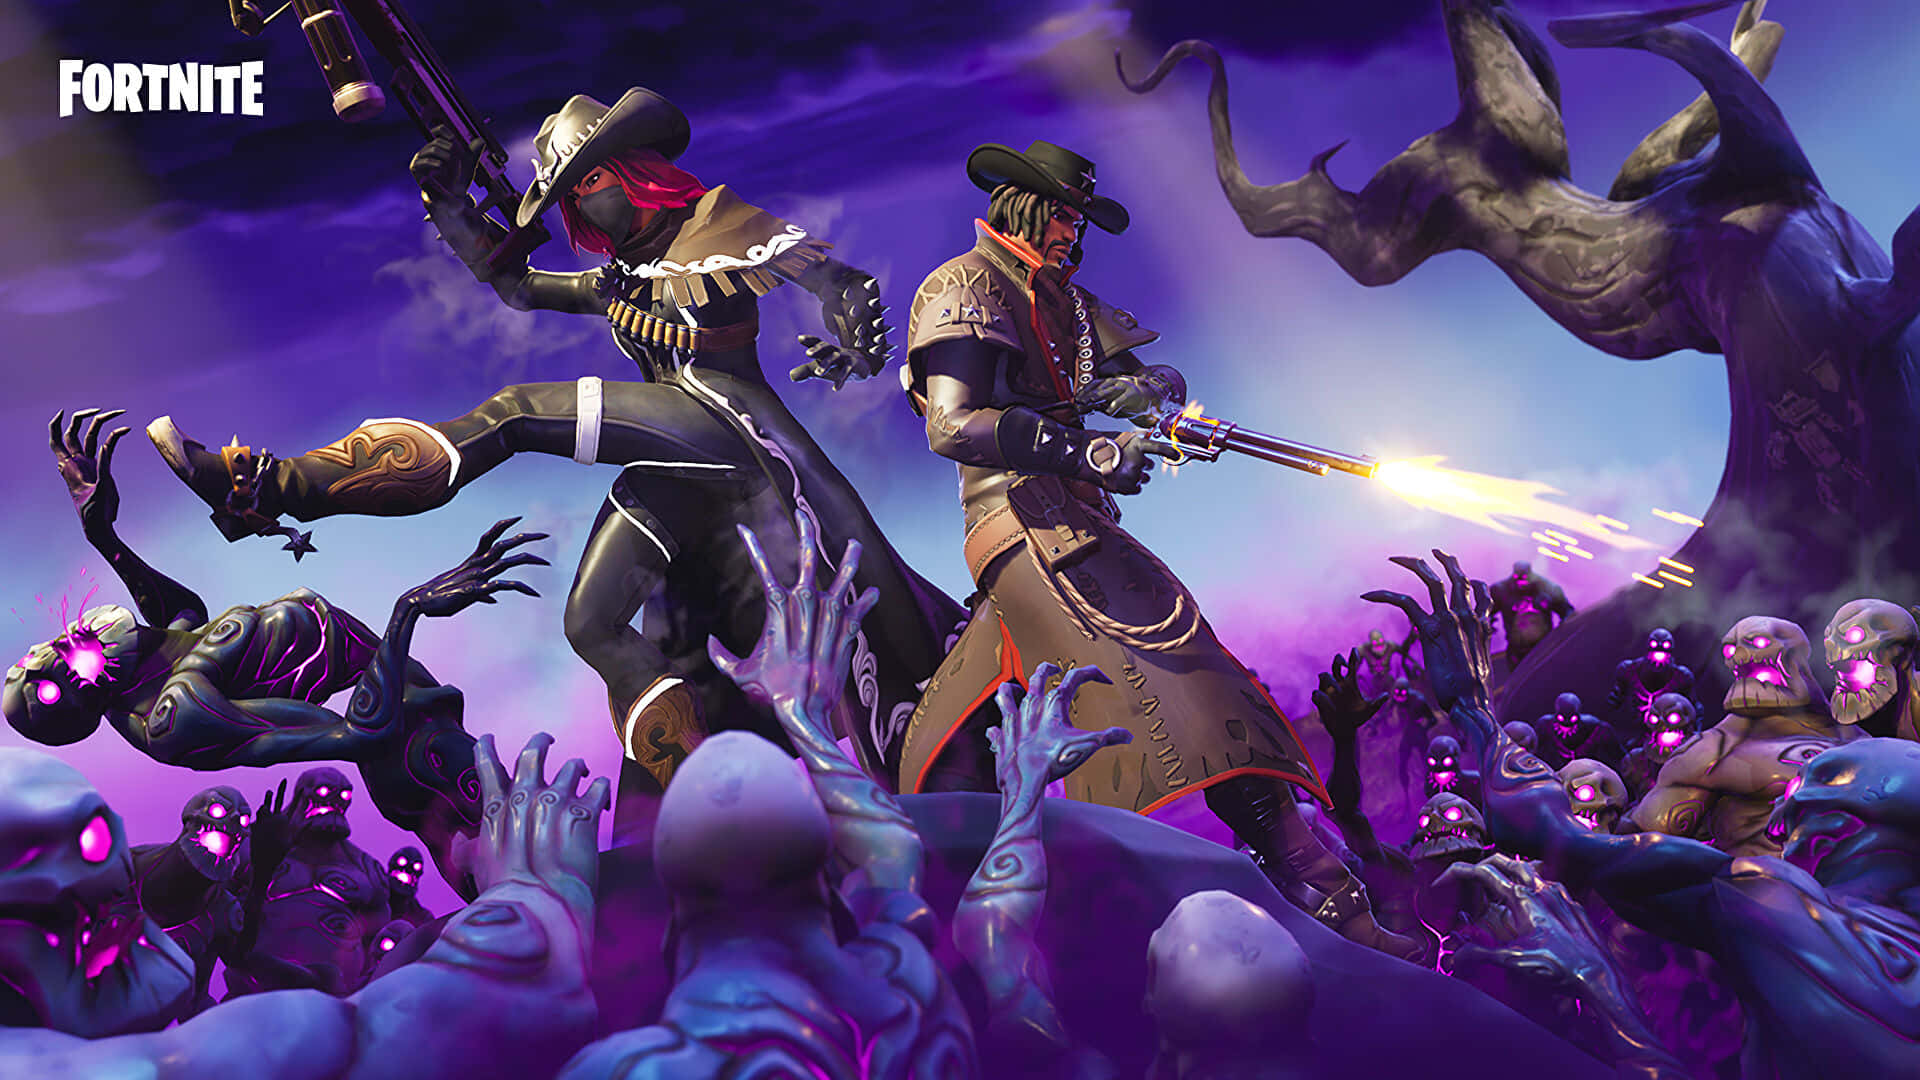 “Conquer the Battle Royale With Fortnite Purple” Wallpaper